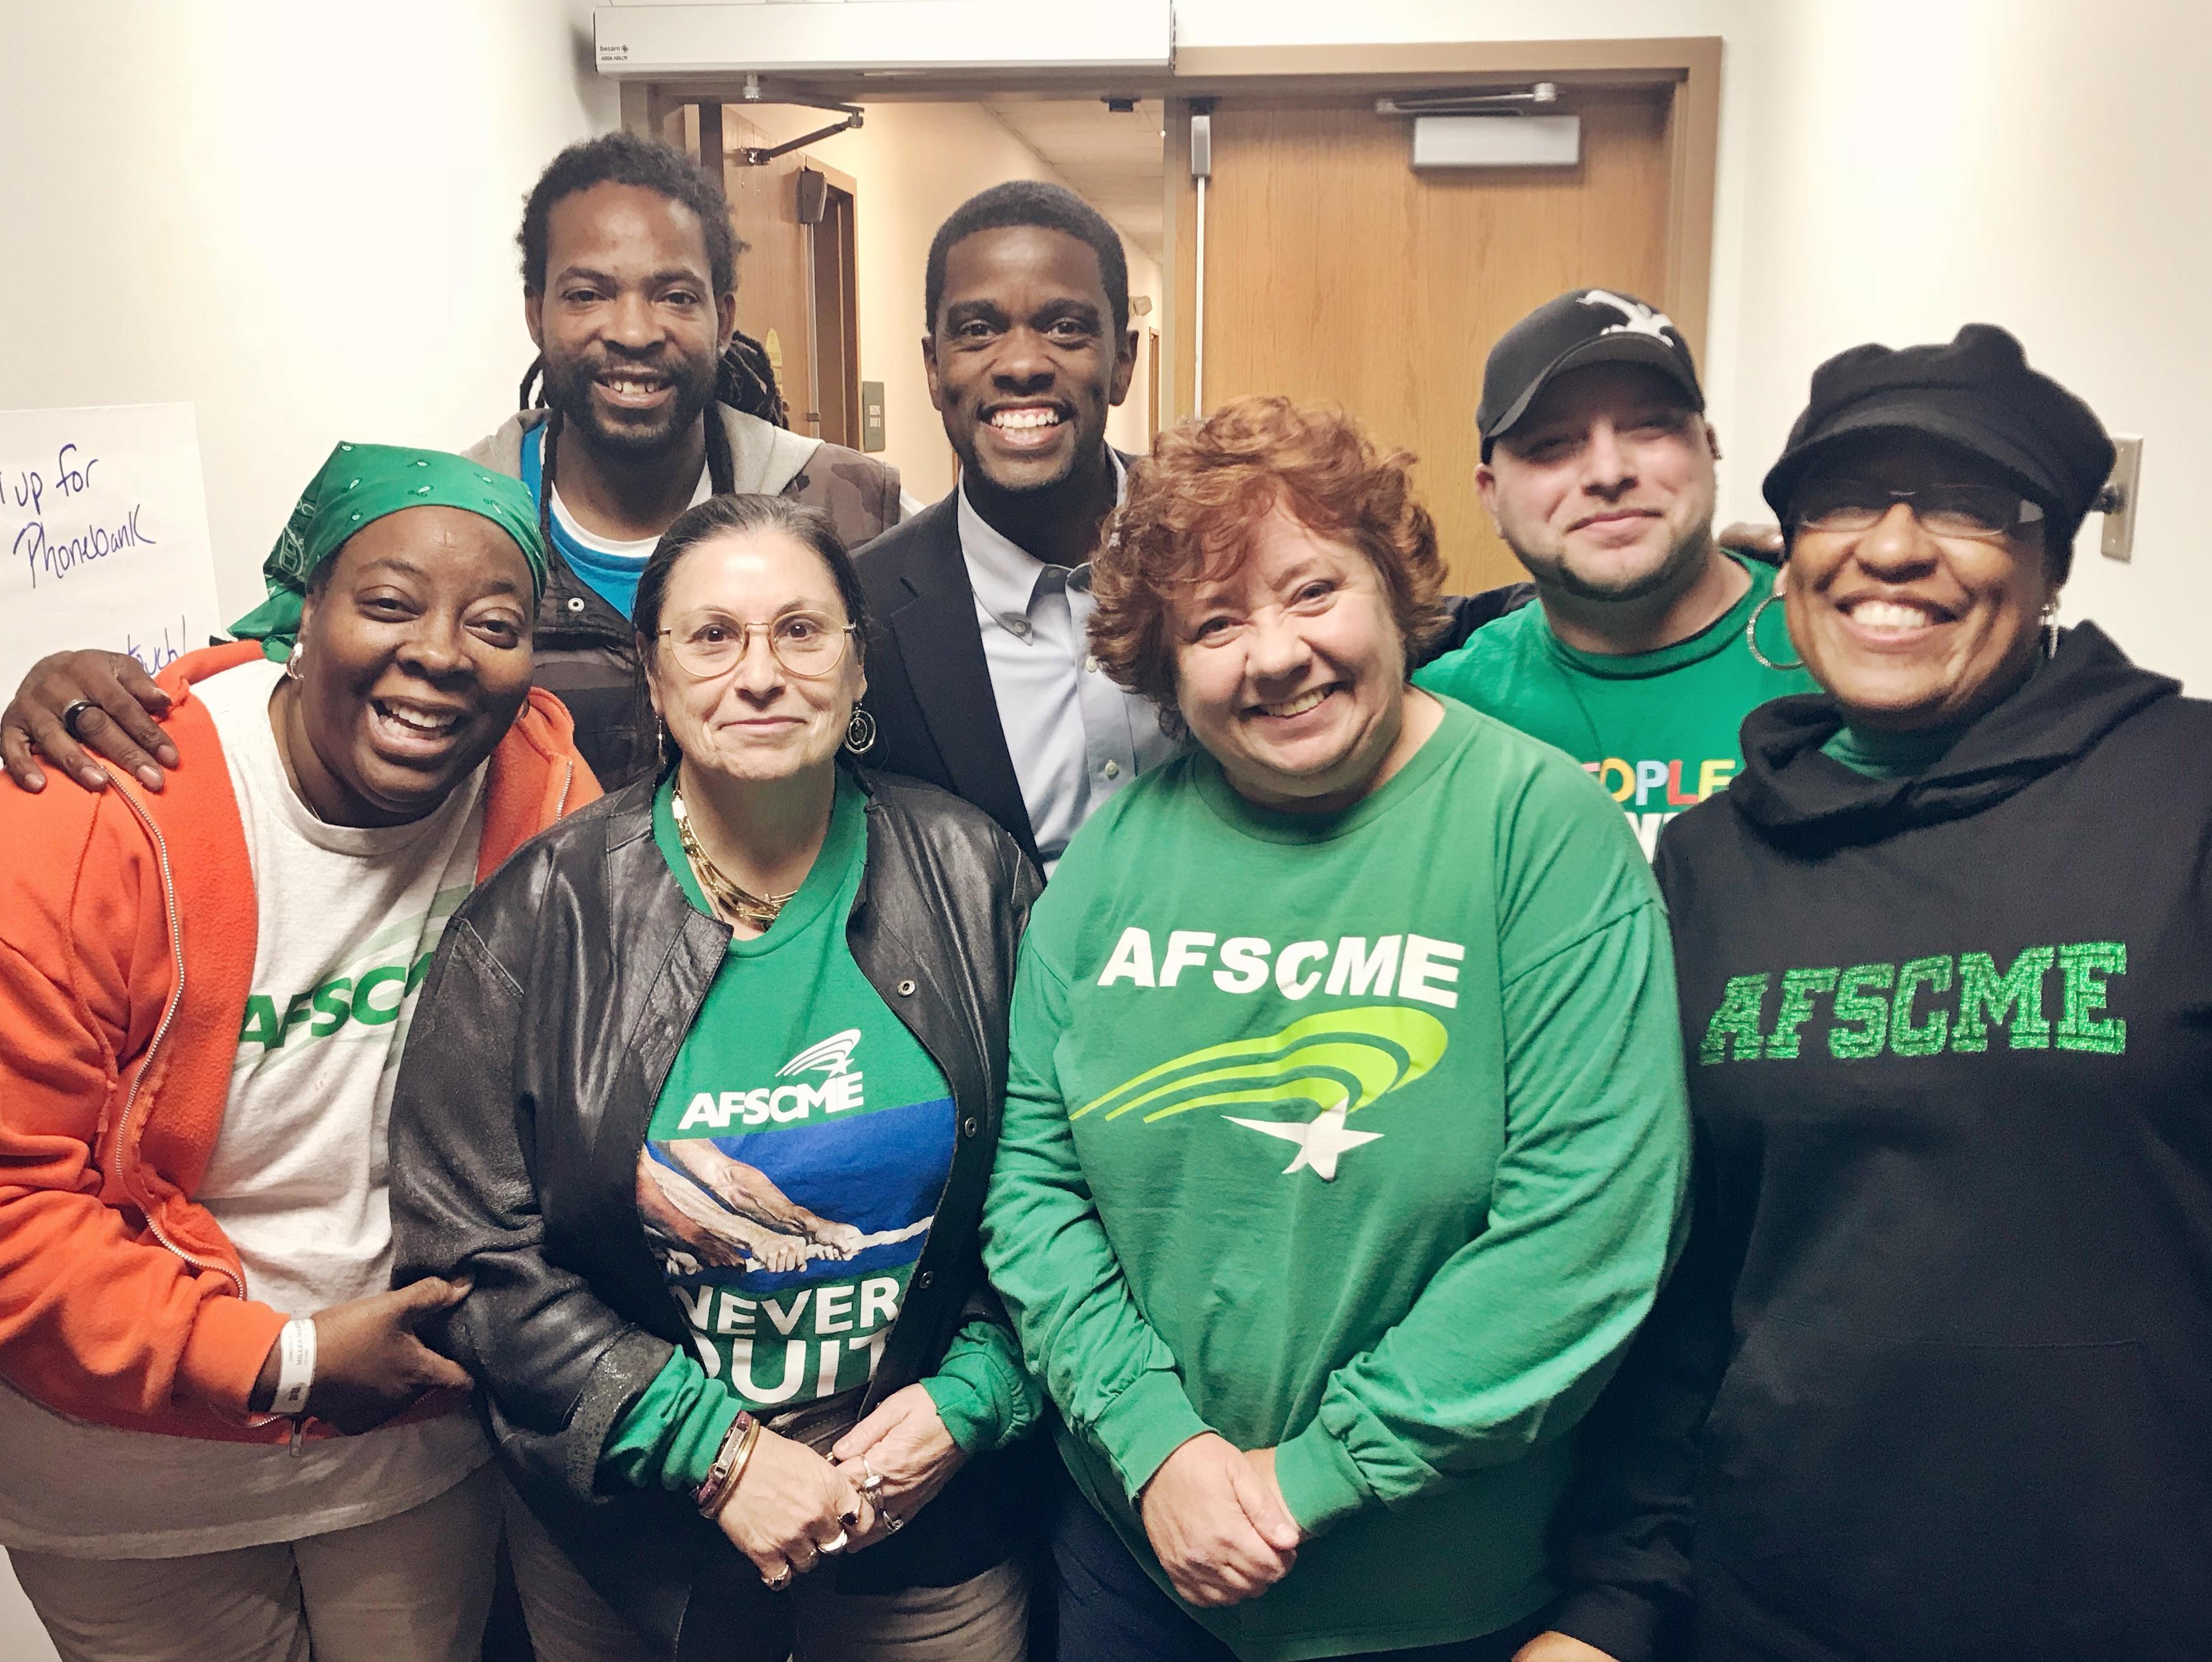 AFSCME members campaigned hard for Saint Paul’s new mayor, Melvin Carter (back row, second from left).